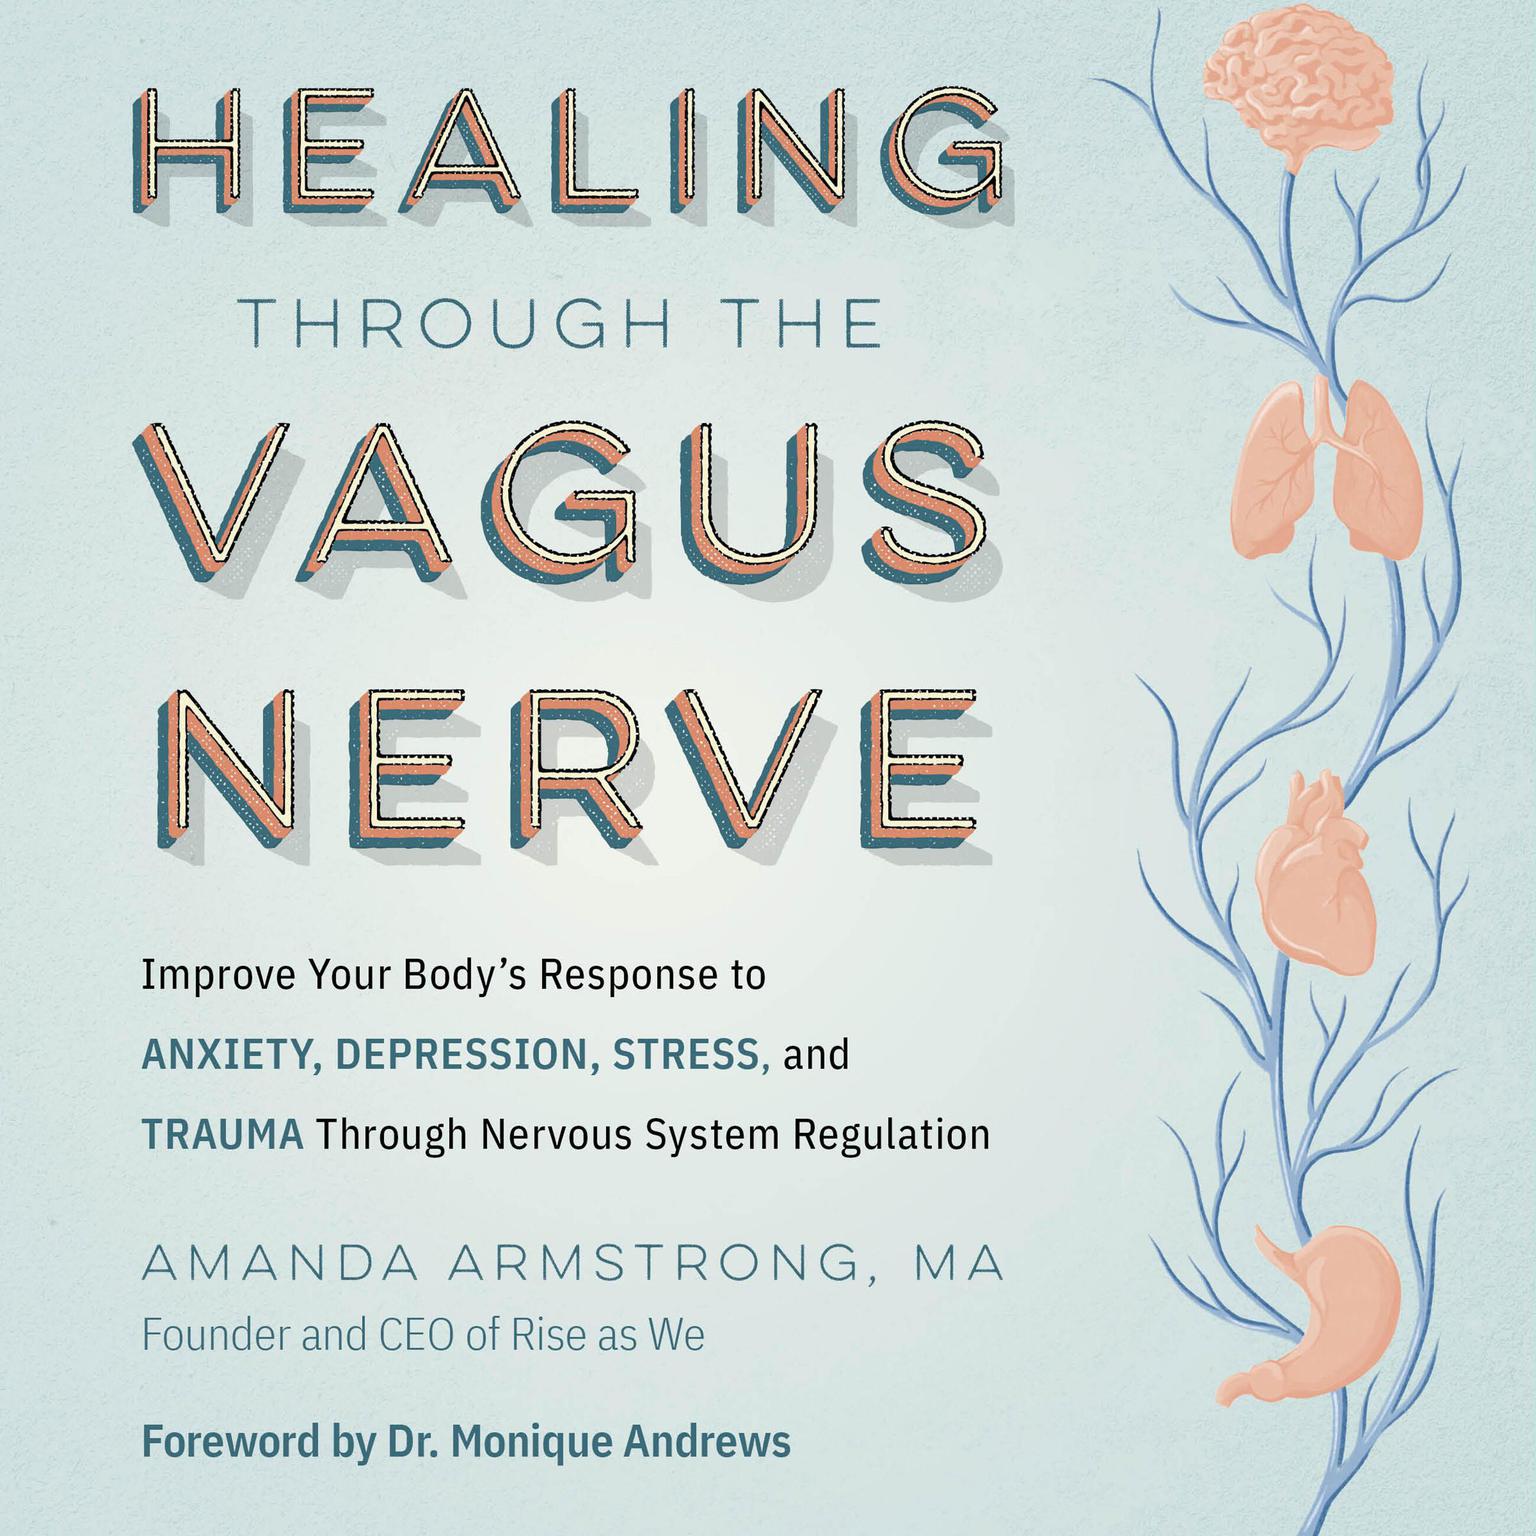 Healing Through the Vagus Nerve: Improve Your Bodys Response to Anxiety, Depression, Stress, and Trauma Through Nervous System Regulation Audiobook, by Amanda Armstrong